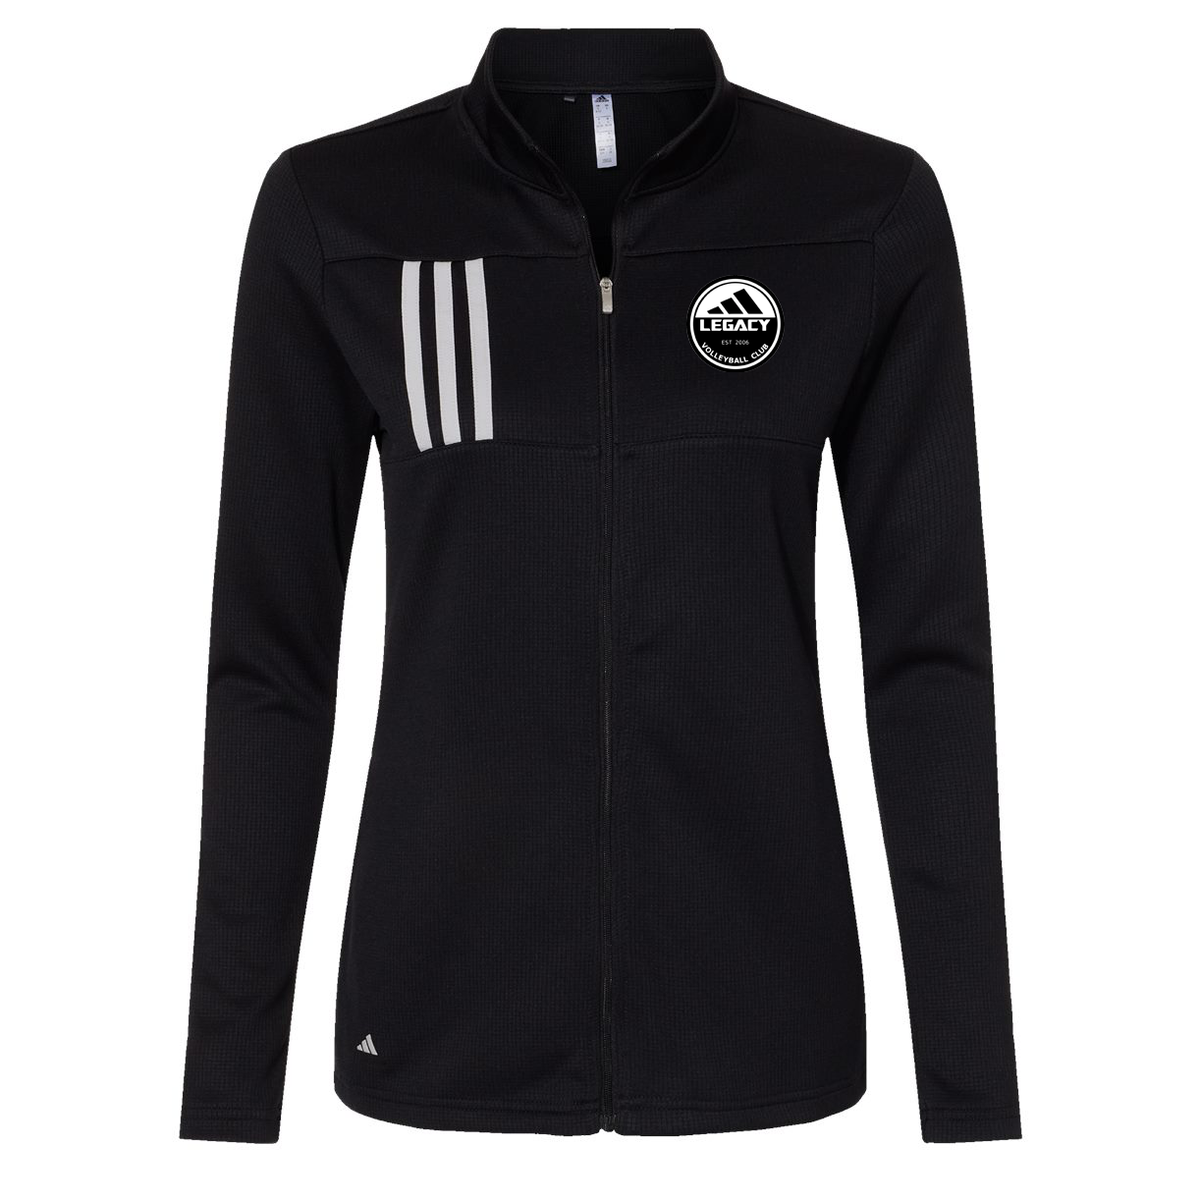 Legacy Volleyball Club Women's 3-Stripes Double Knit Full-Zip